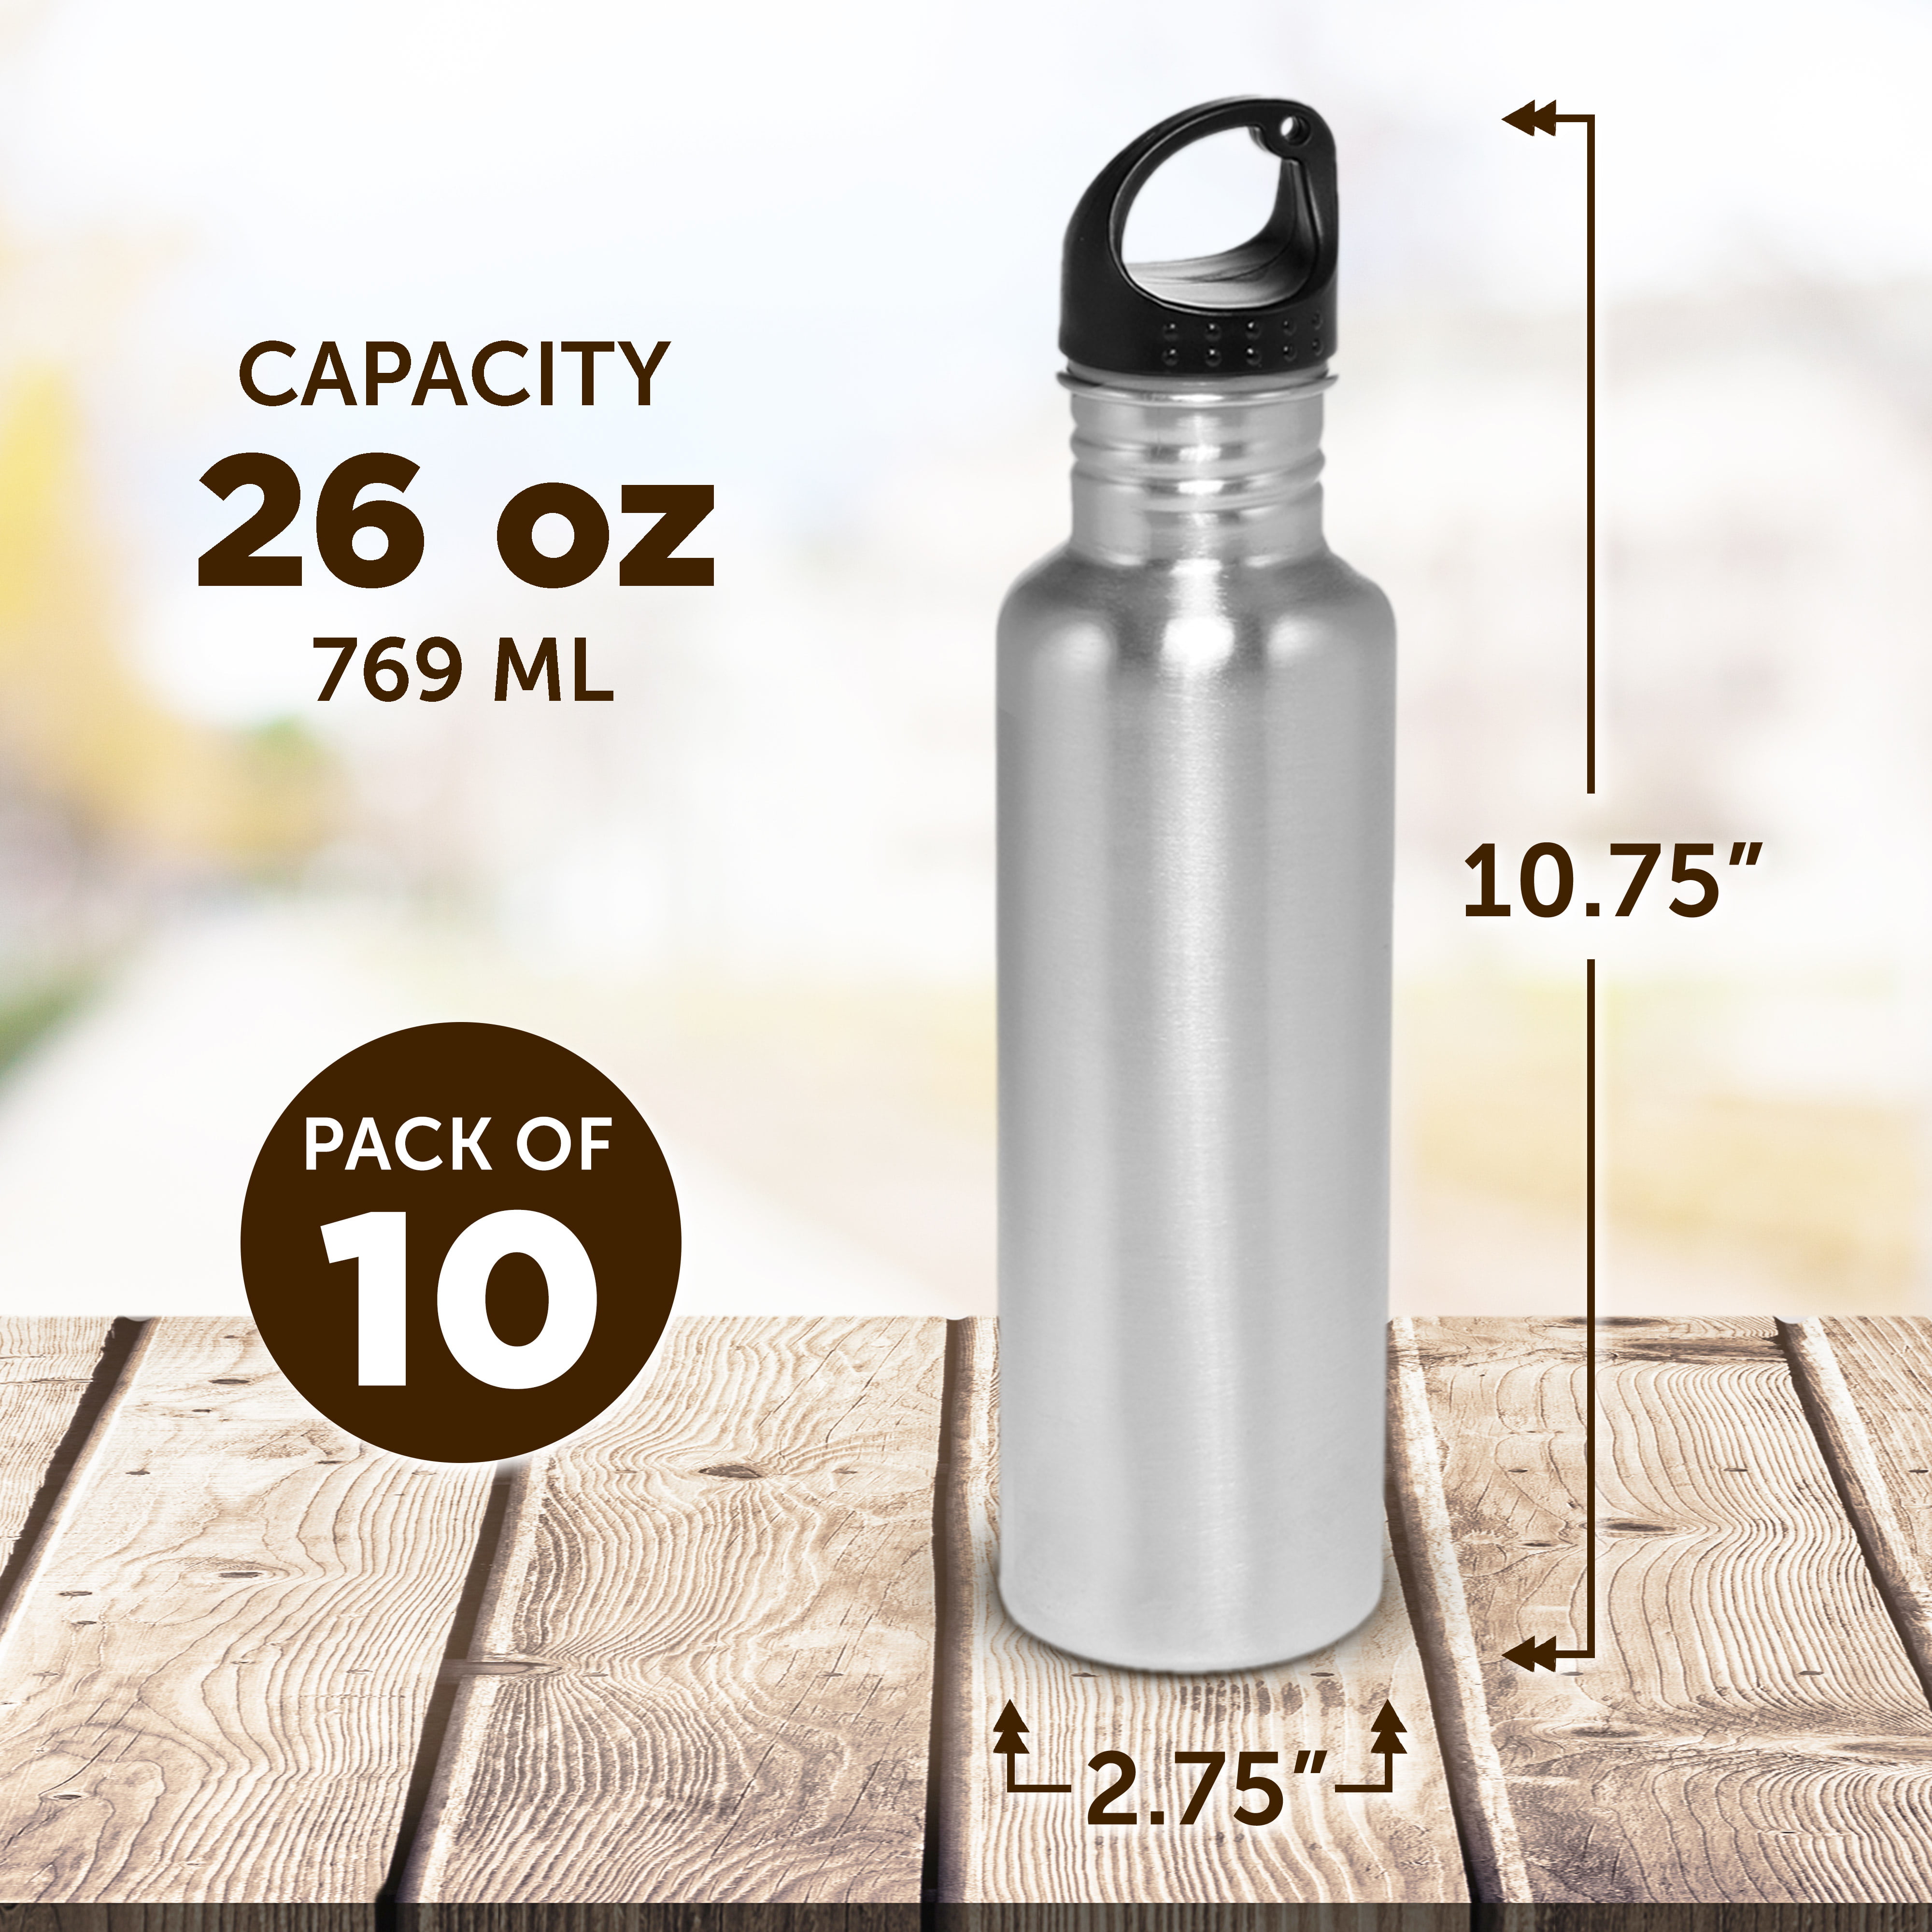  DISCOUNT PROMOS Bullet Shape Stainless Steel Water Bottles 26 oz.  Set of 10, Bulk Pack - Leak Proof, With Carabiner, Leak Proof, Perfect for  Gym, Hiking, Camping, Outdoor Sports - Silver 